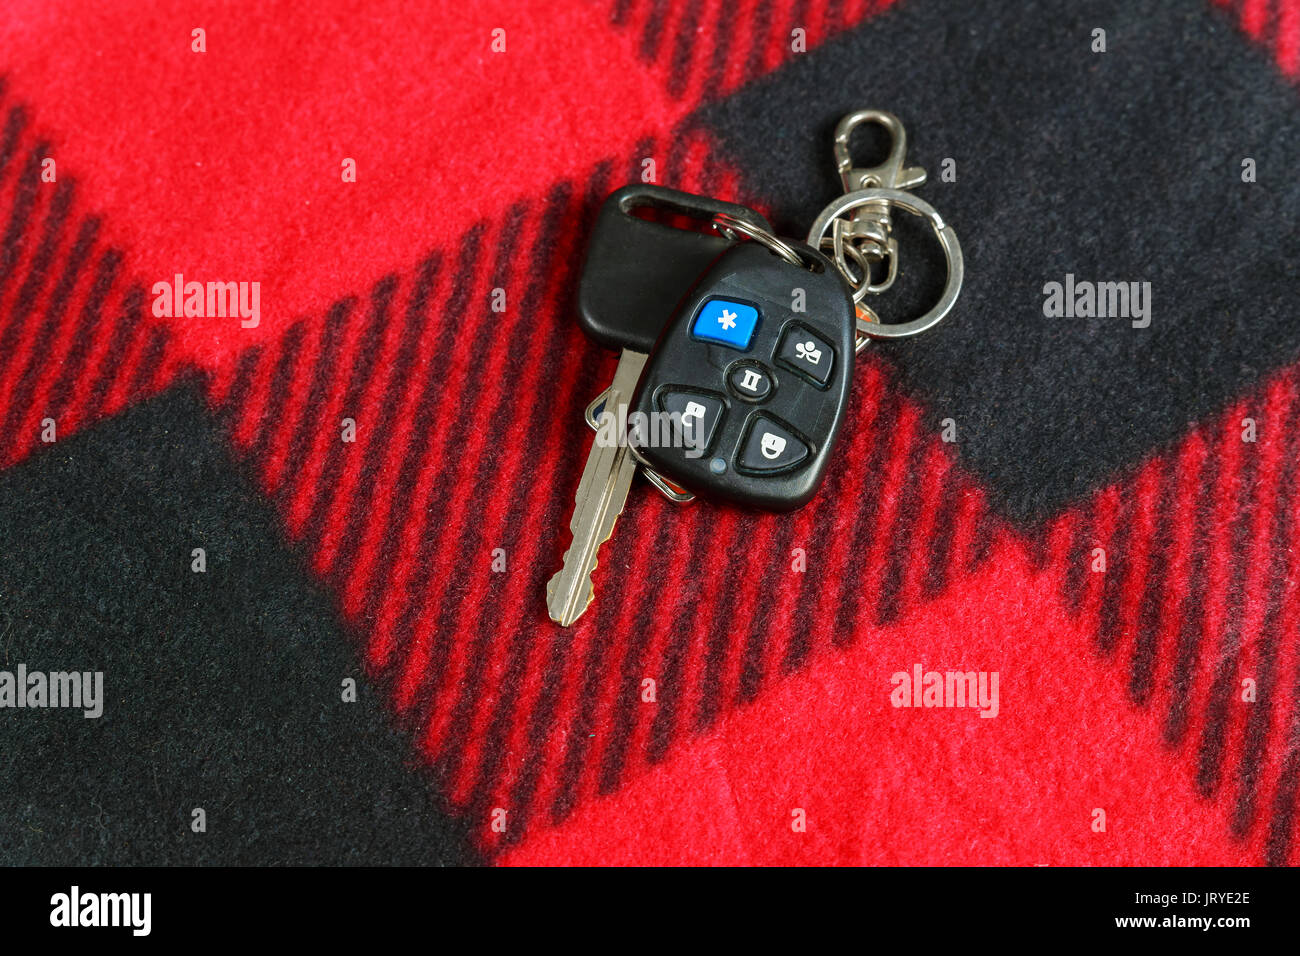 Keys from the car on the red fabric Car key and alarm system charm background Stock Photo